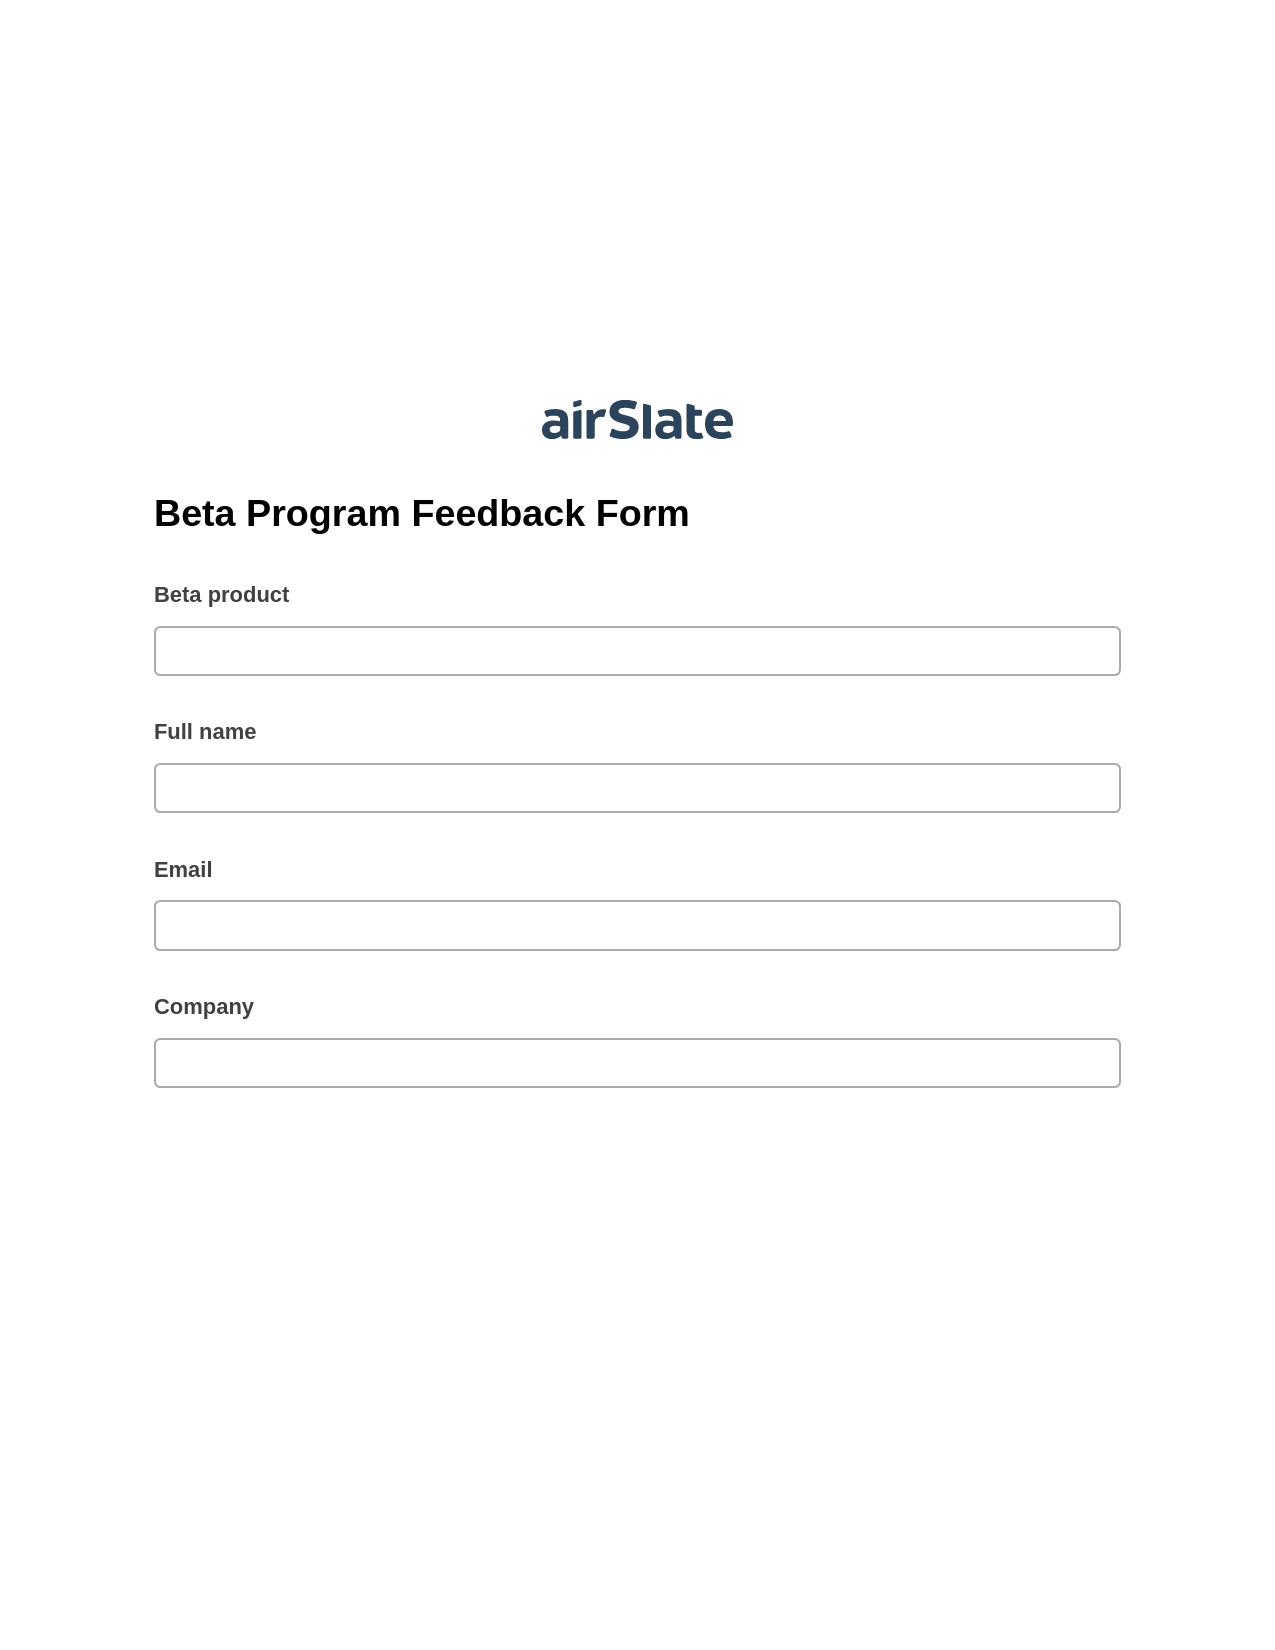 Beta Program Feedback Form Pre-fill from NetSuite Records Bot, Update Salesforce Record Bot, Post-finish Document Bot